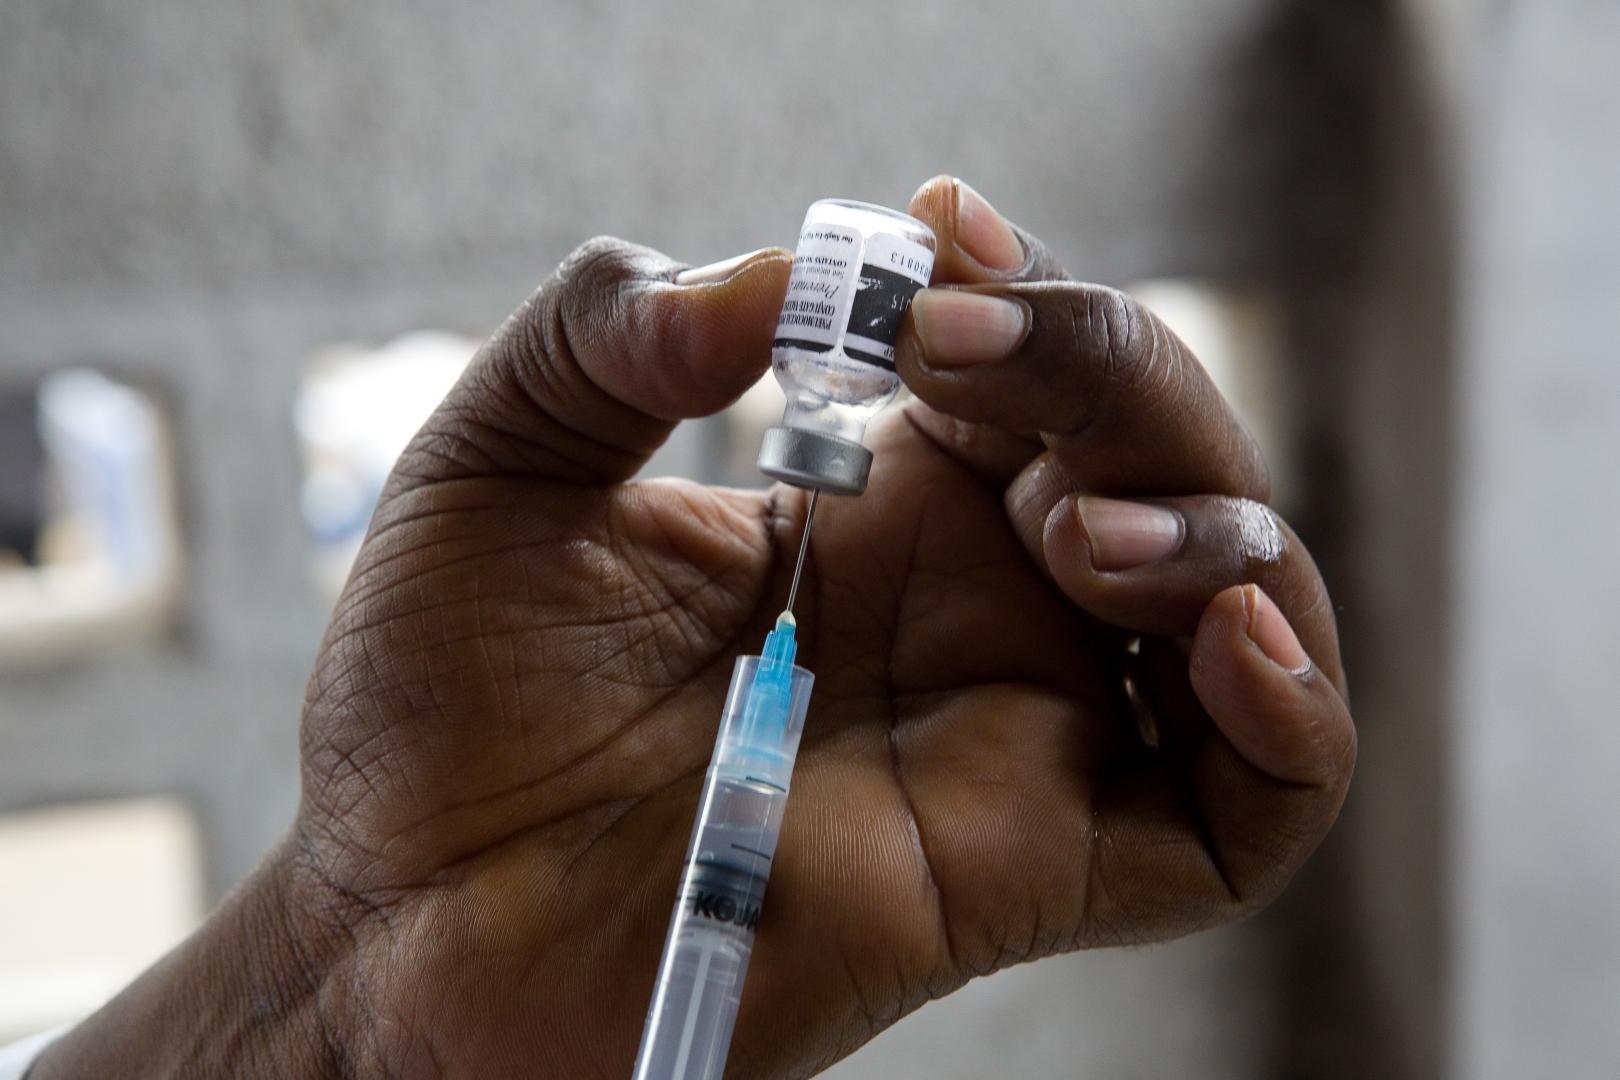 Nine African countries agree to begin journey towards pooled procurement to increase their access to affordable life-saving vaccines